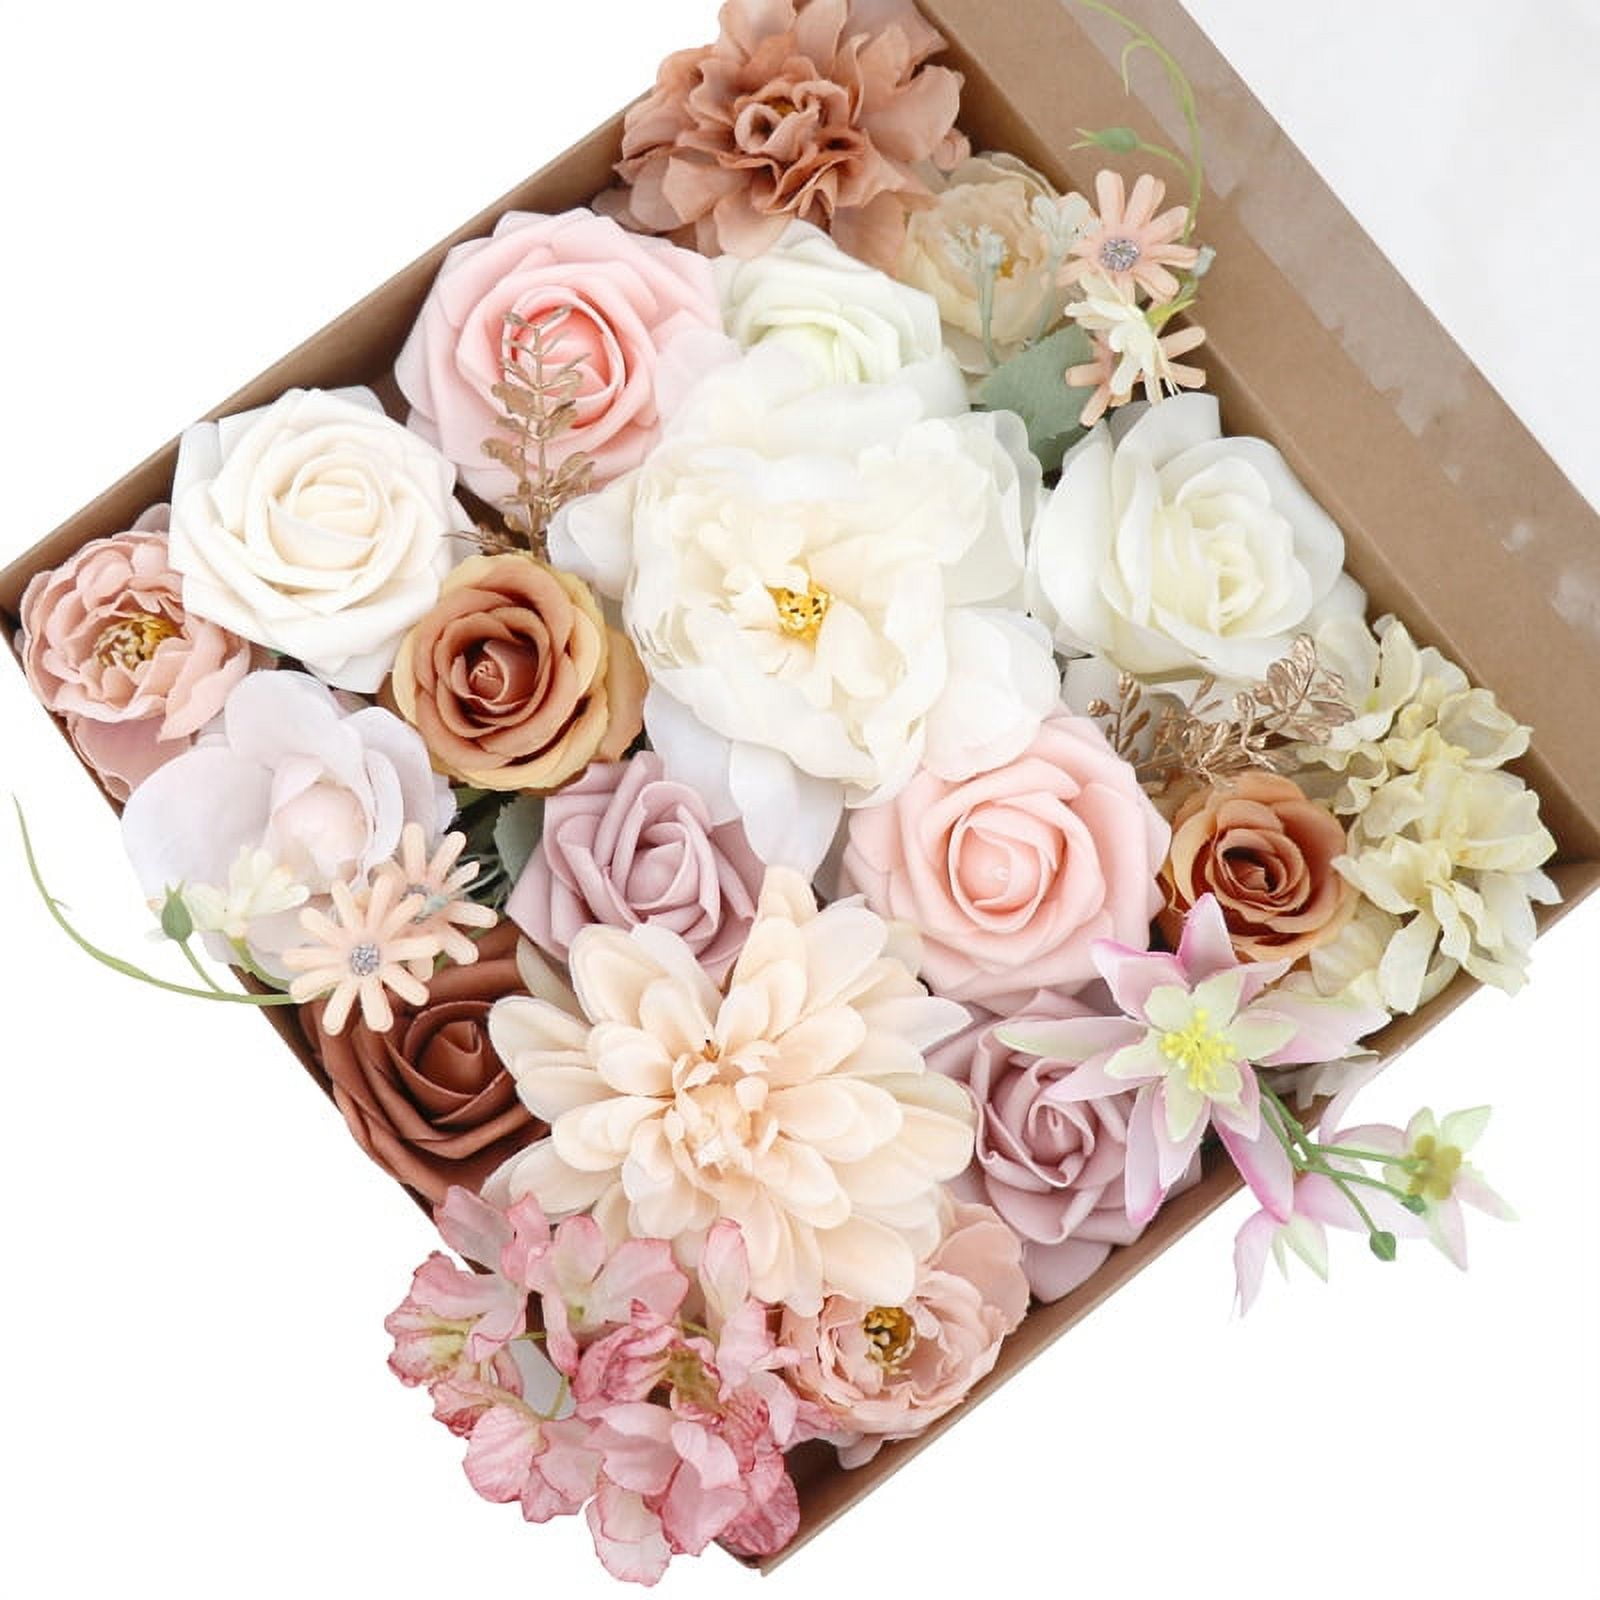 Realistic Fake Thanksgiving Bouquet Artificial Winter Artificial Flowers  For Decoration For Party Layout And Baby Shower From Yasuogu, $17.34